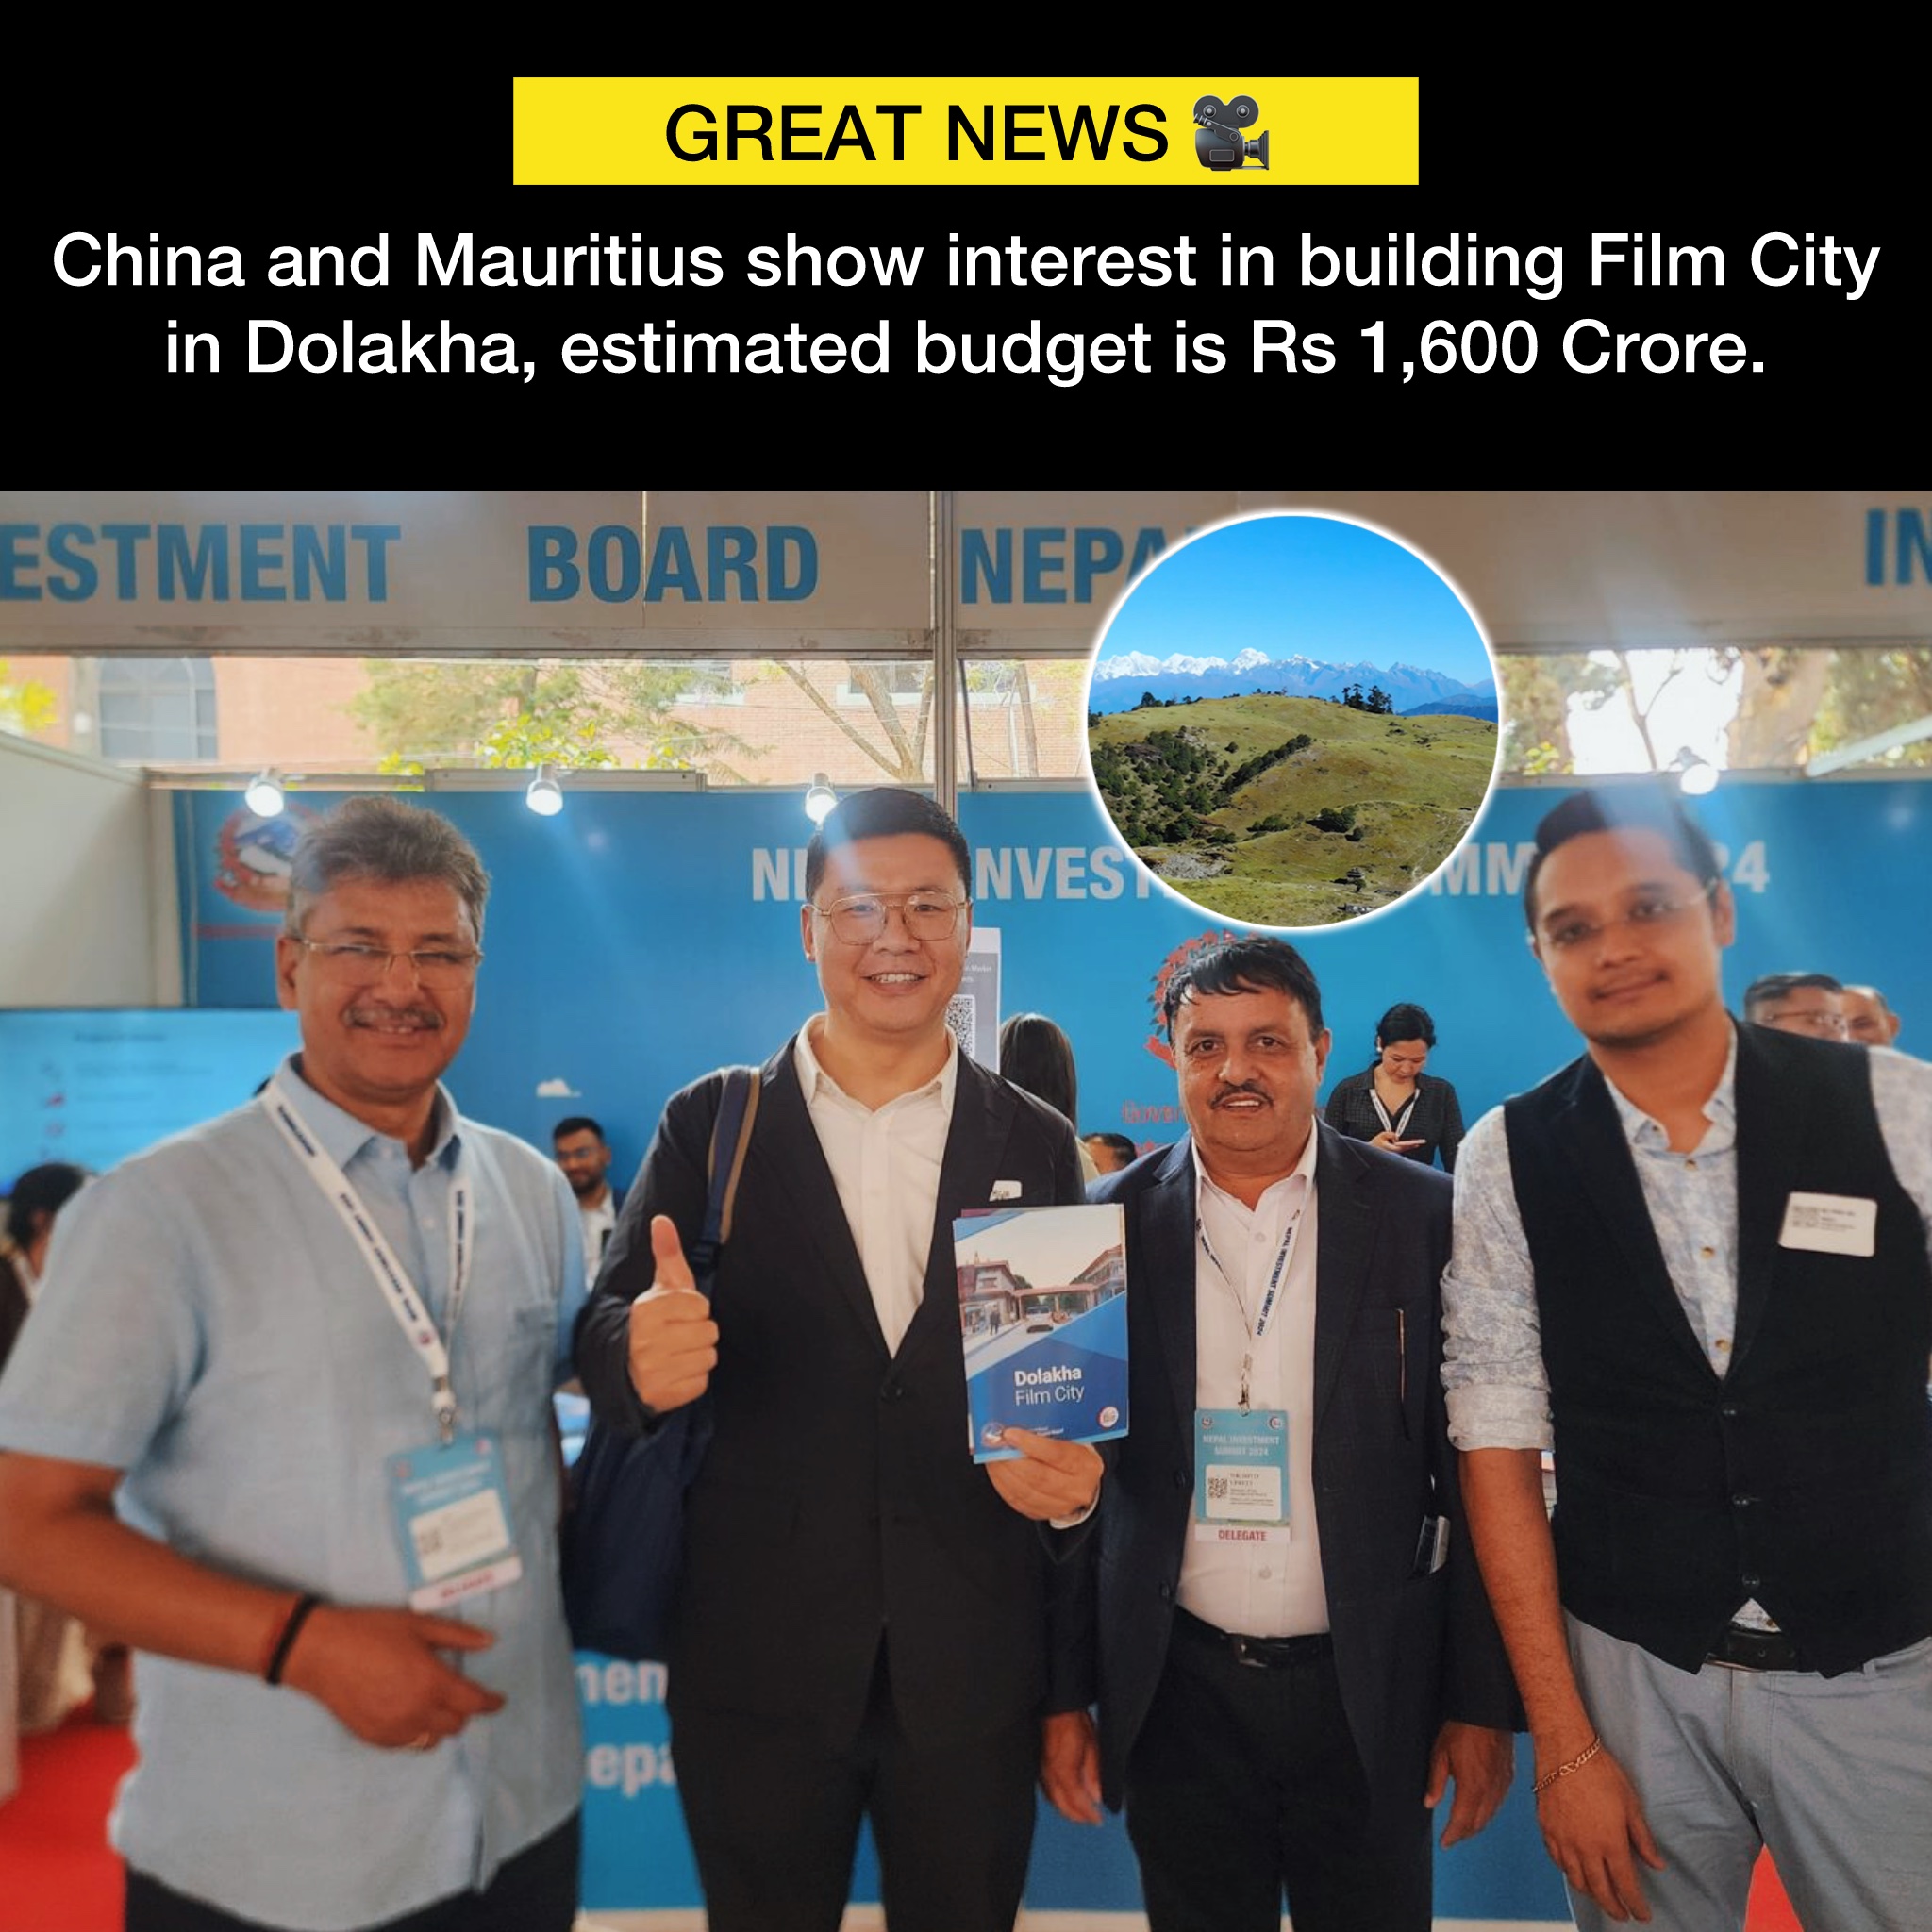 China and Mauritius Express Interest in Building Film City in Dolakha, Nepal